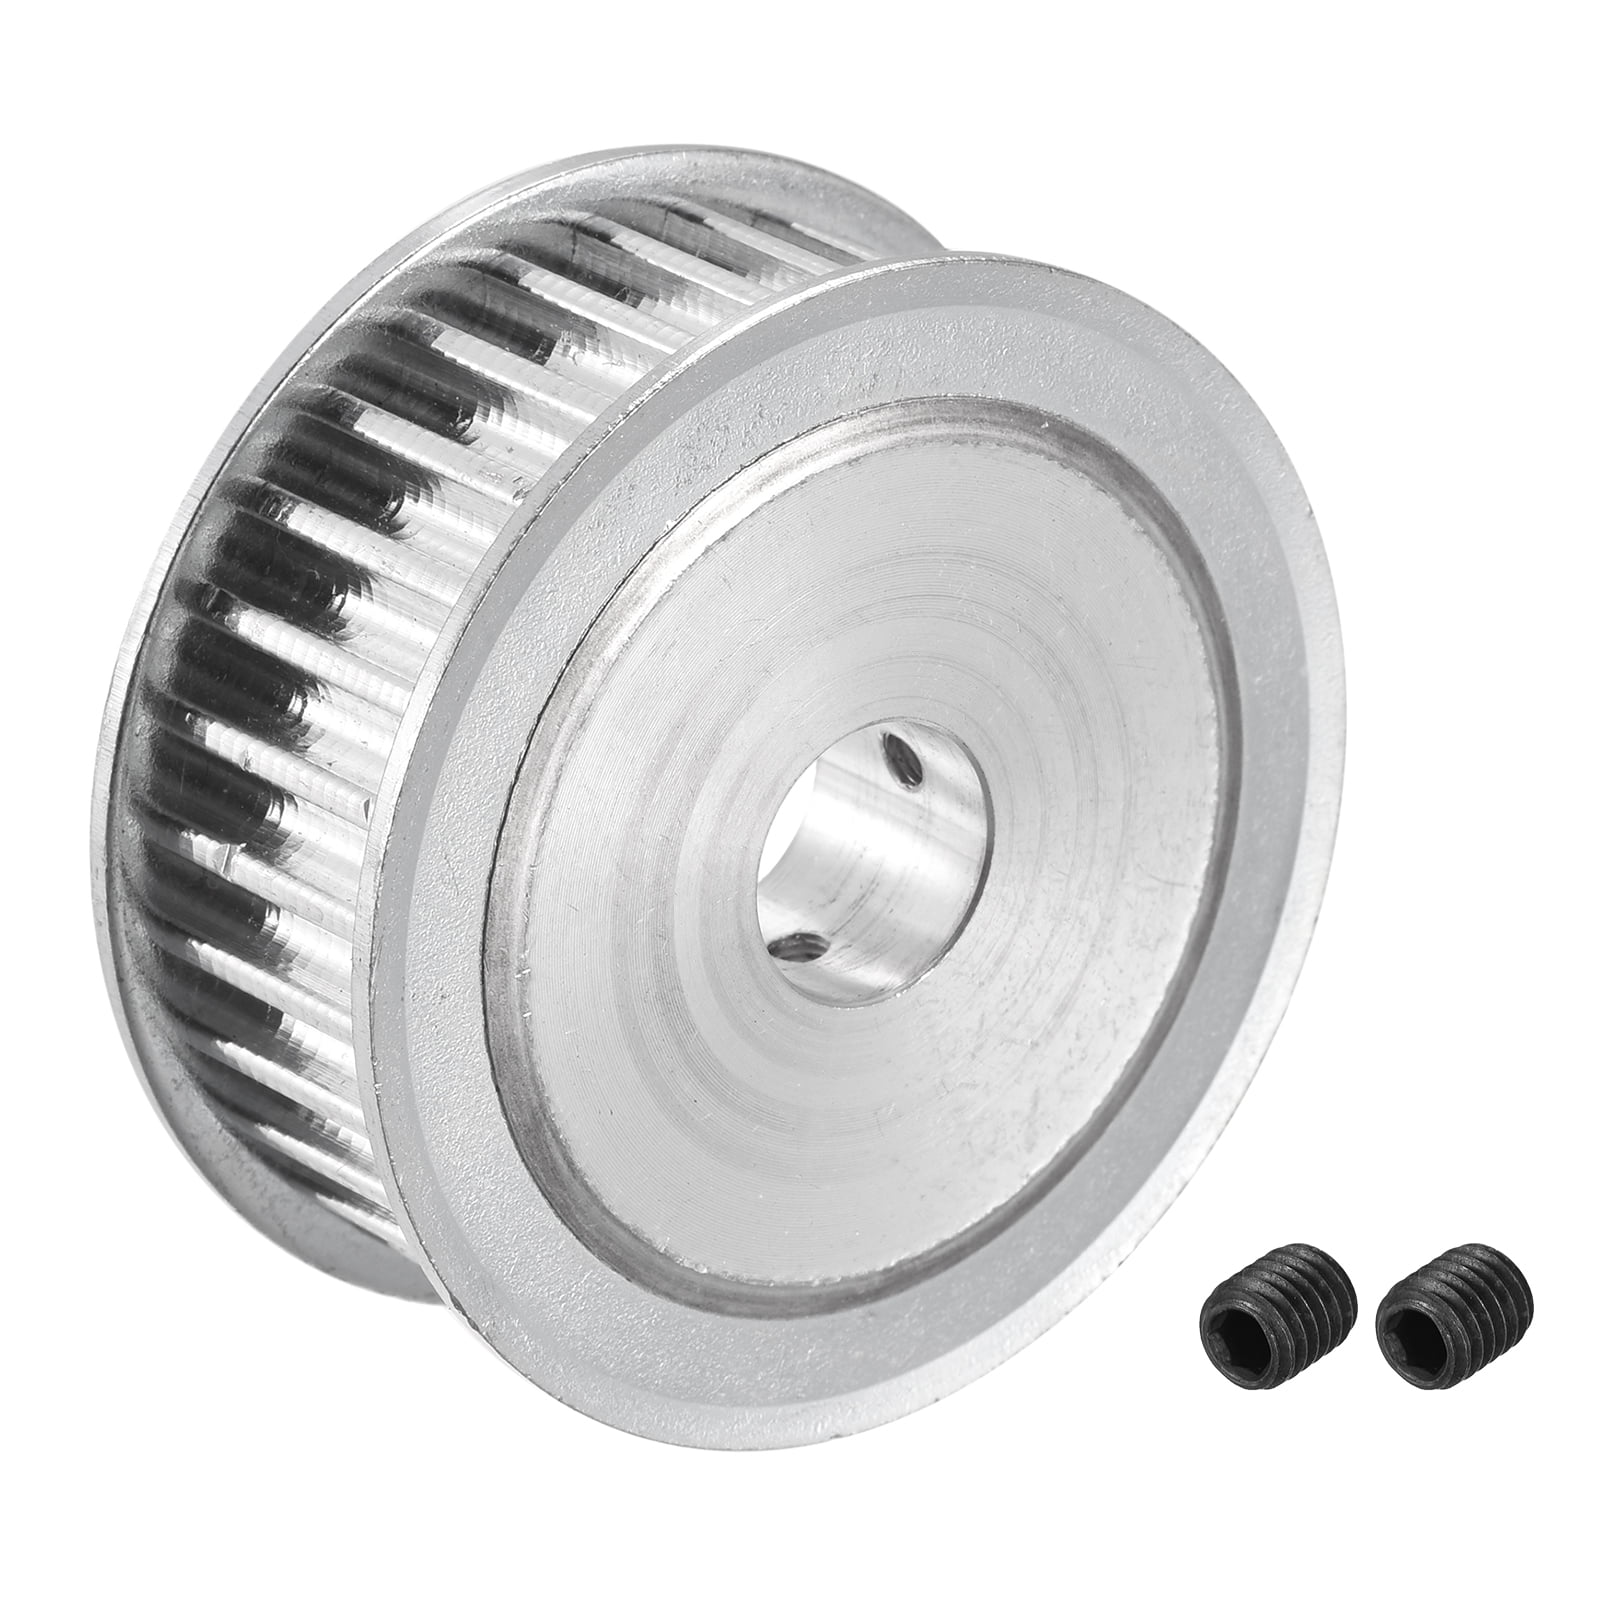 XL Type XL30T Aluminum Timing Belt Pulley 30 Teeth 10mm Bore for Stepper Motor 